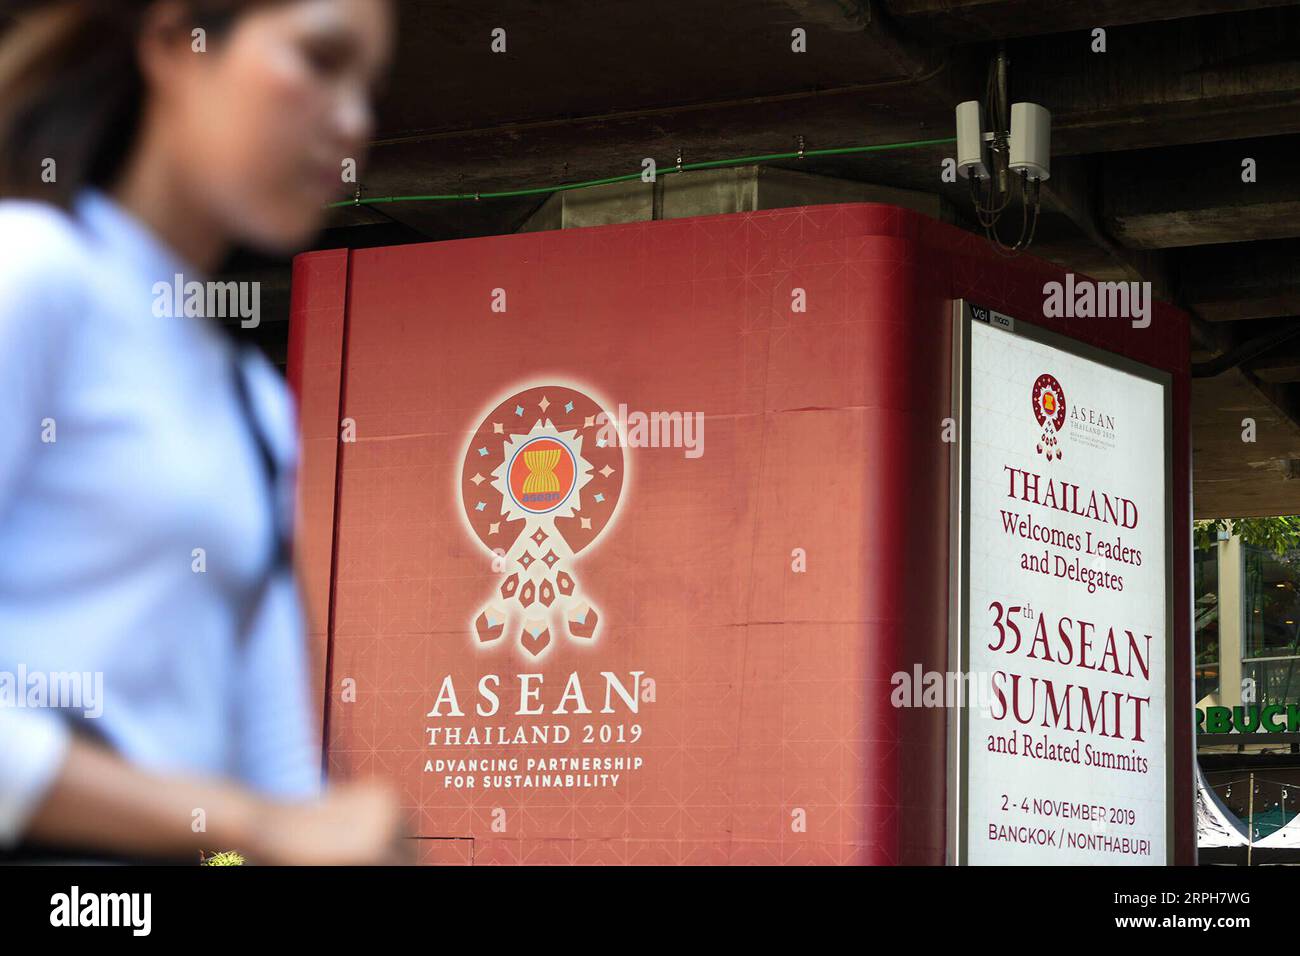 191101 -- BANGKOK, Nov. 1, 2019 -- A woman passes by a poster of the 35th ASEAN summit and related summits in Bangkok, Thailand, Oct. 30, 2019. The 35th ASEAN summit and related summits are scheduled for Nov. 2 to 4 in Bangkok. Rachen Sageamsak THAILAND-BANGKOK-ASEAN SUMMIT-PREPARATION LaxHeng PUBLICATIONxNOTxINxCHN Stock Photo